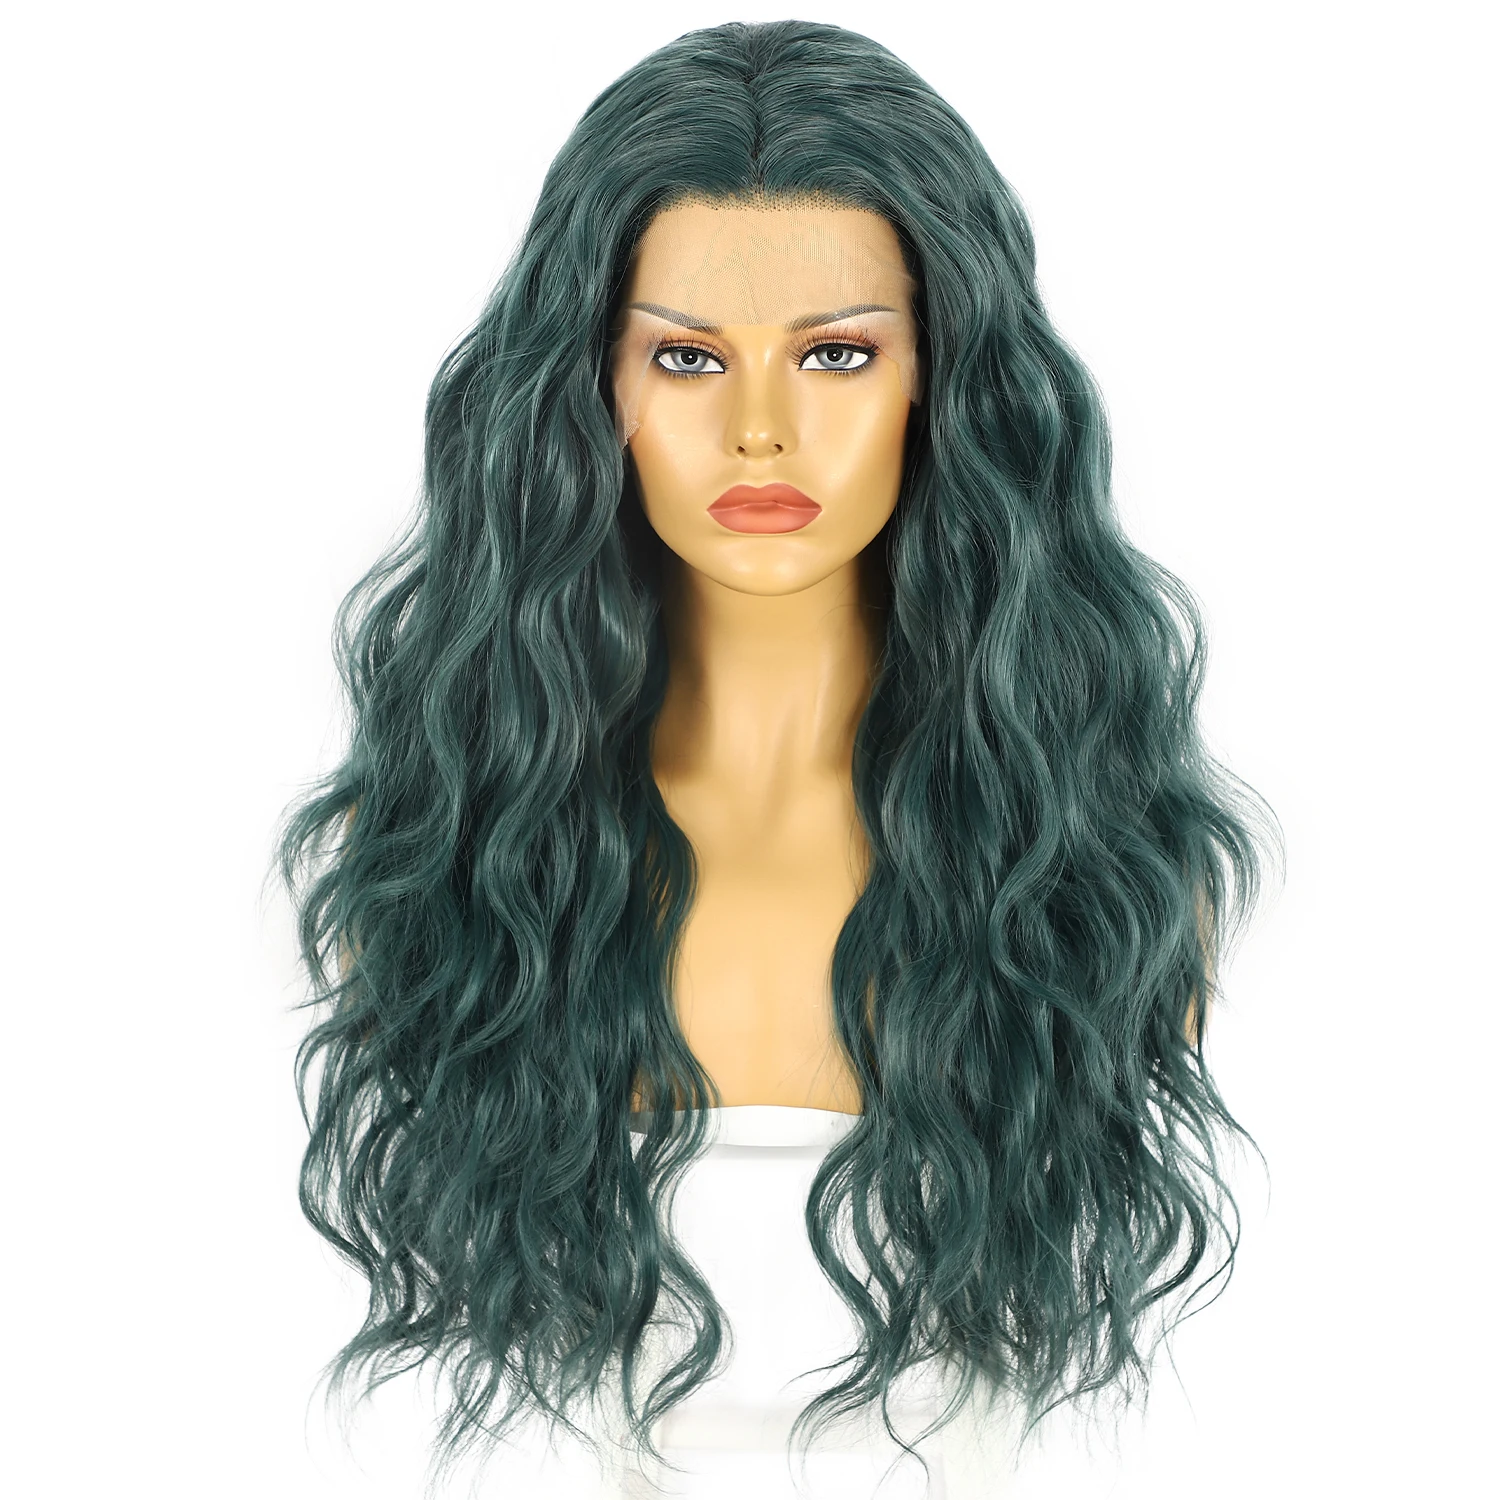 Anogol 13*3 Lacefront Wig High Temperature Fiber Wigs Dyed Wigs Black Girl Colored Synthetic Fashion Hair Wig for Black Women